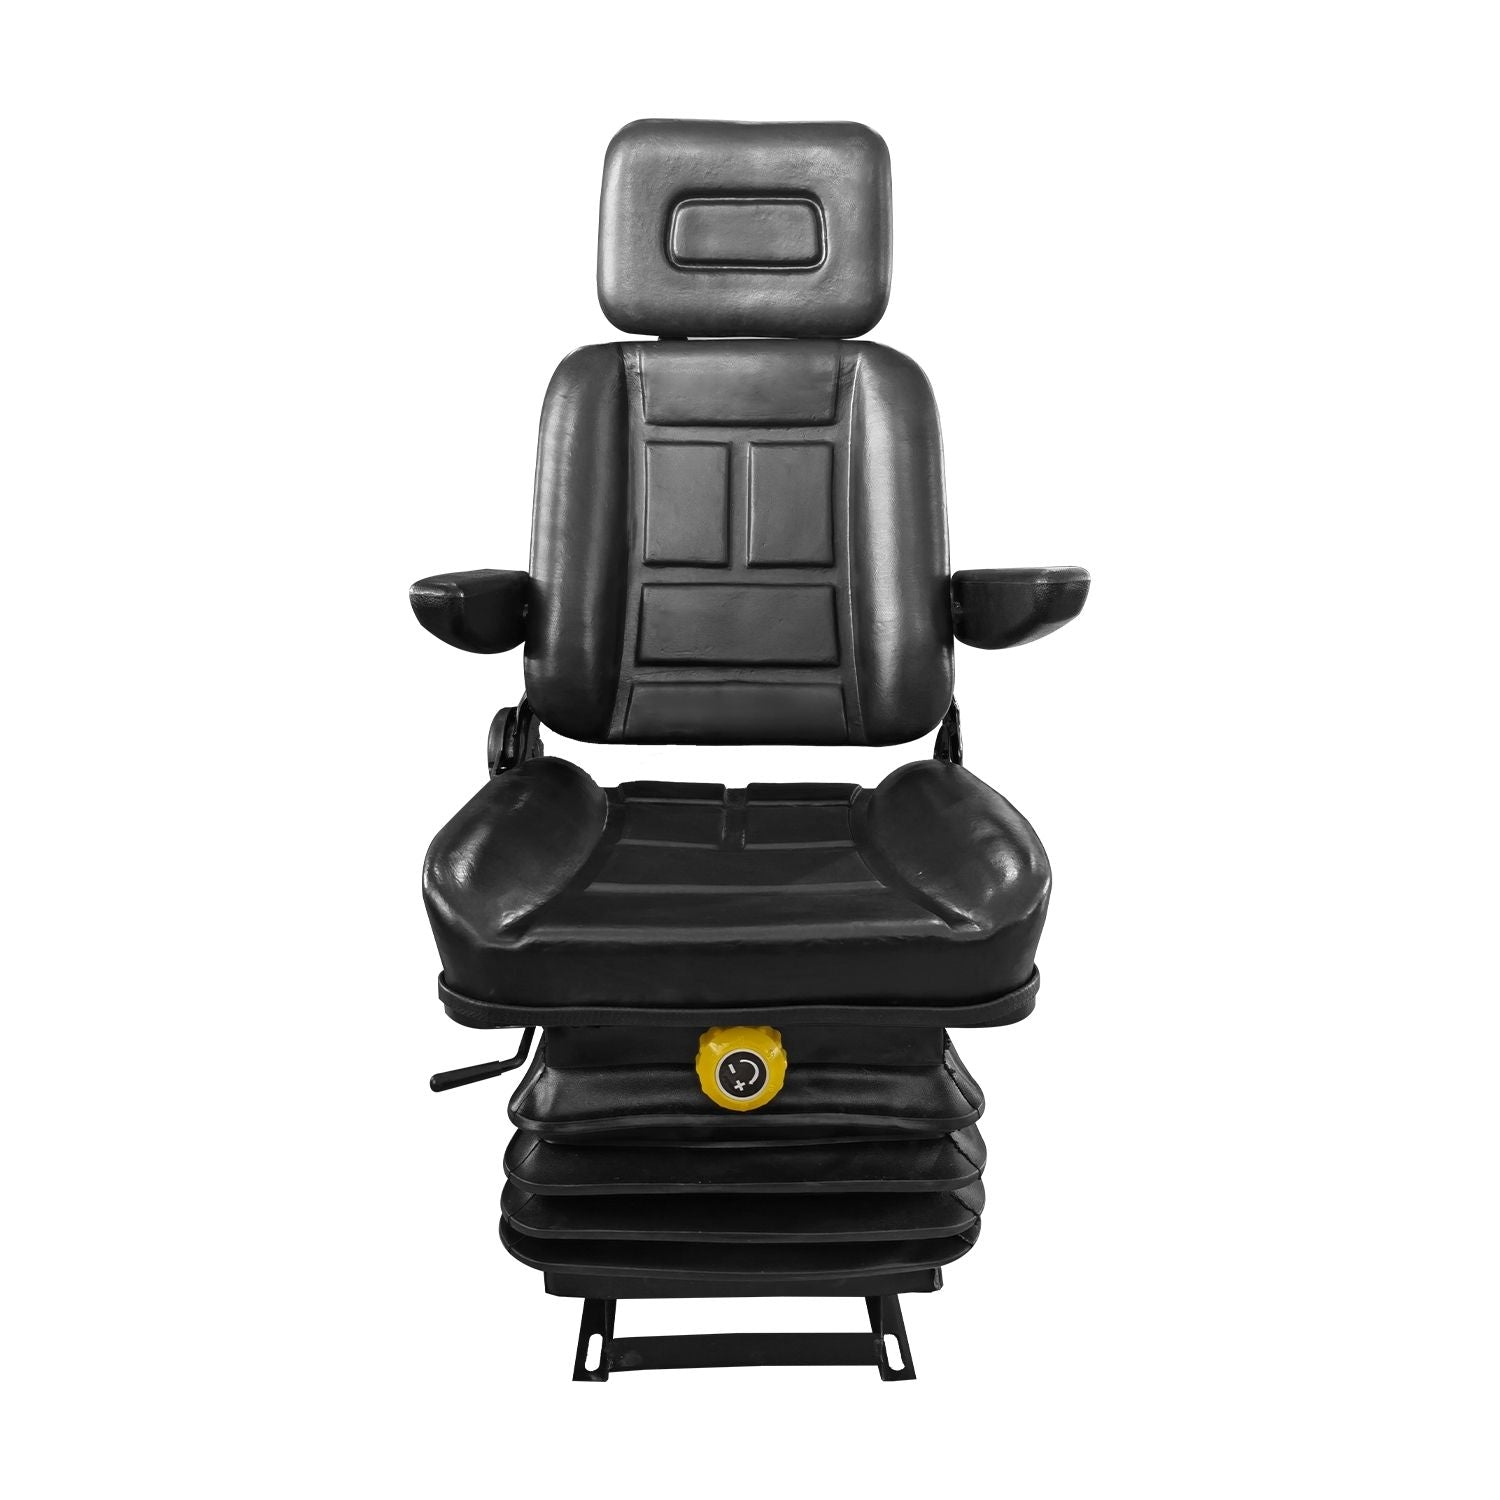 RYNOMATE Adjustable Suspension Seat with Foldable Armrest for Heavy Machinery (Black)